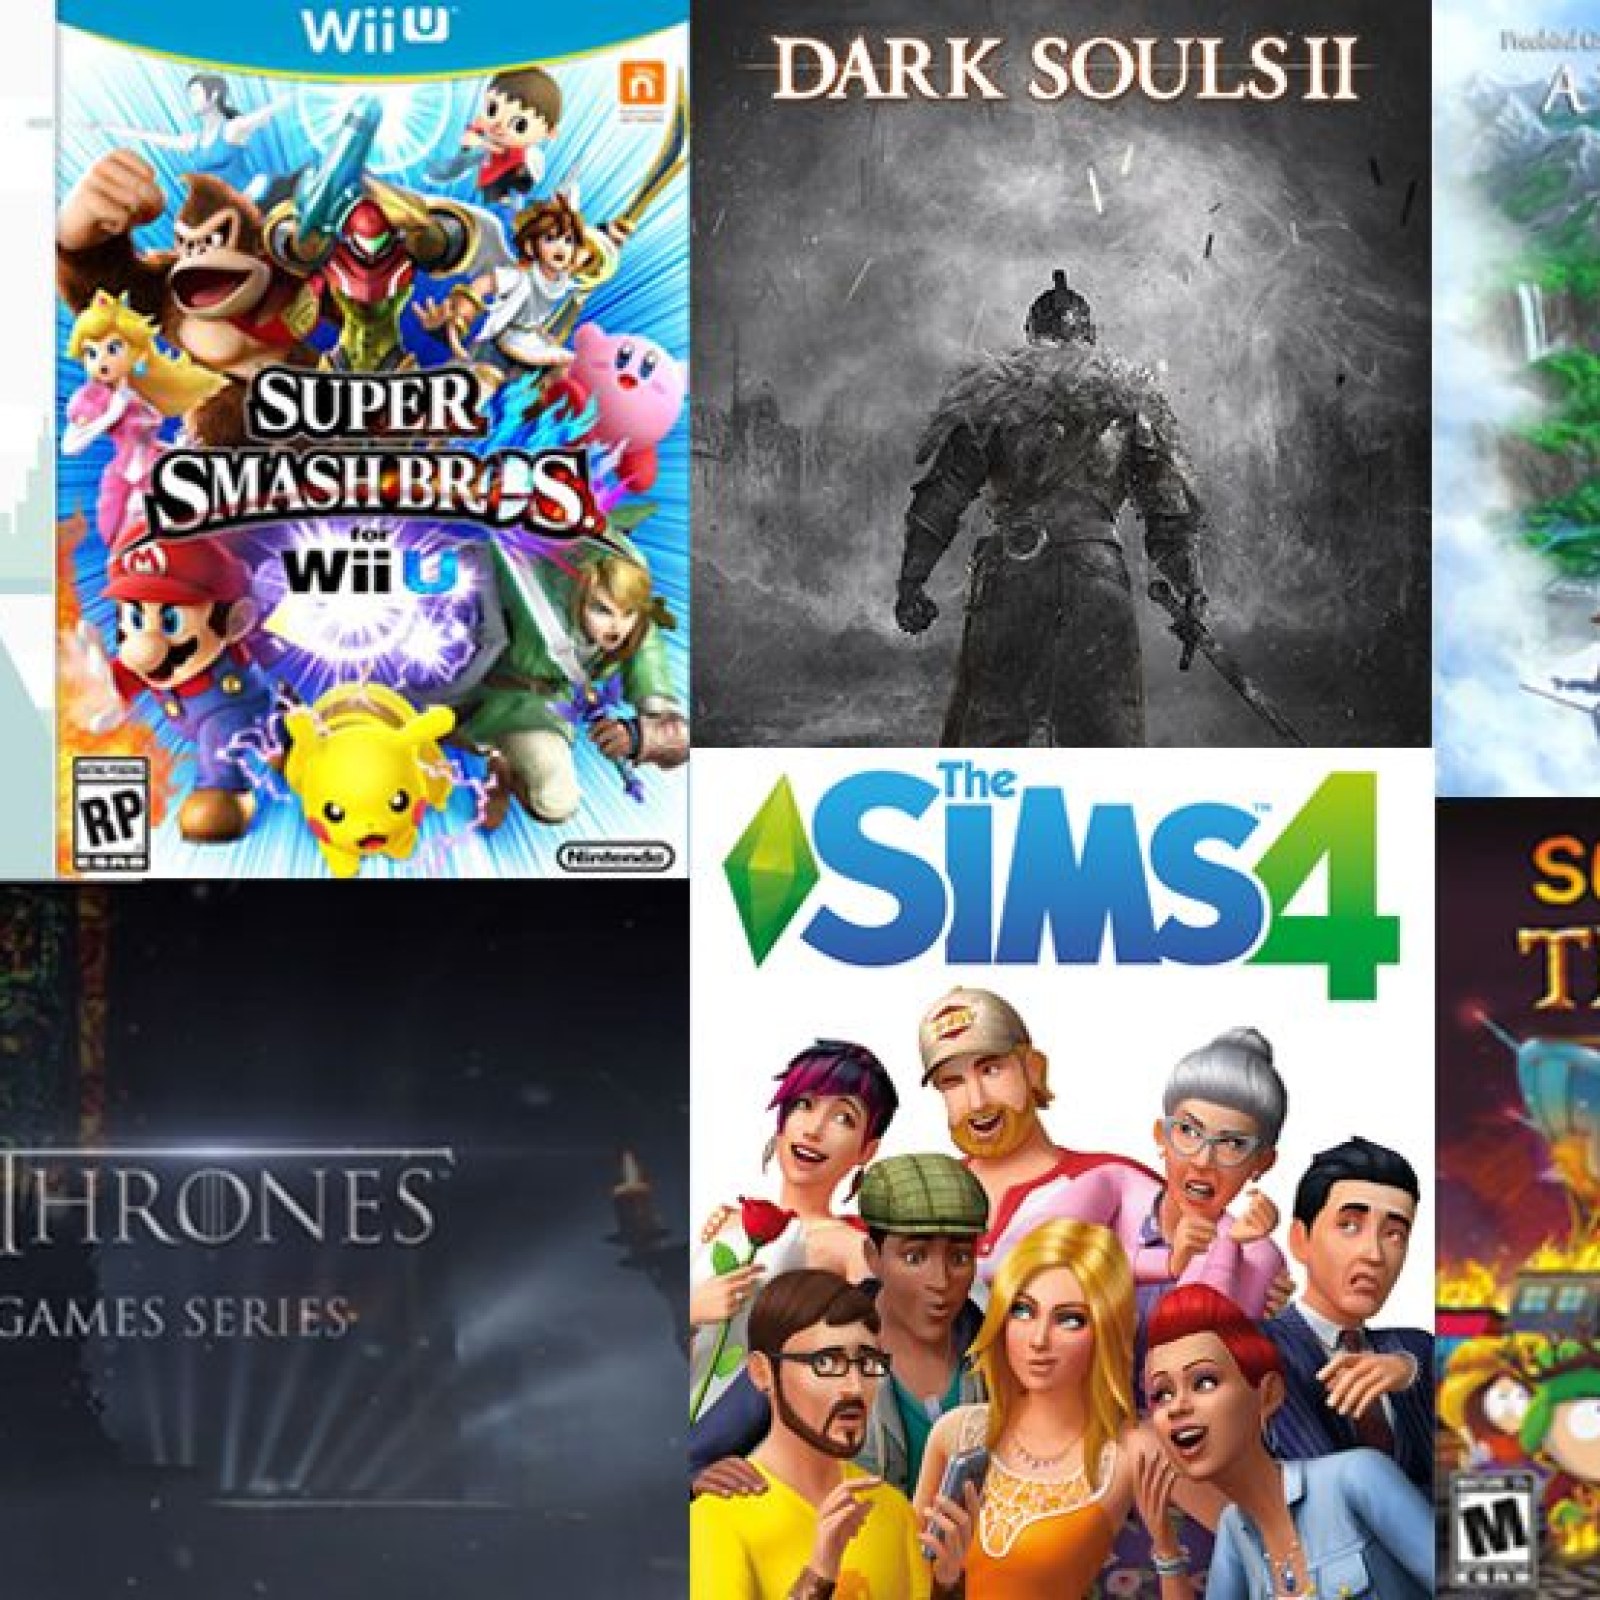 Game(s) of the Year - 2014 to 2022 : r/gaming